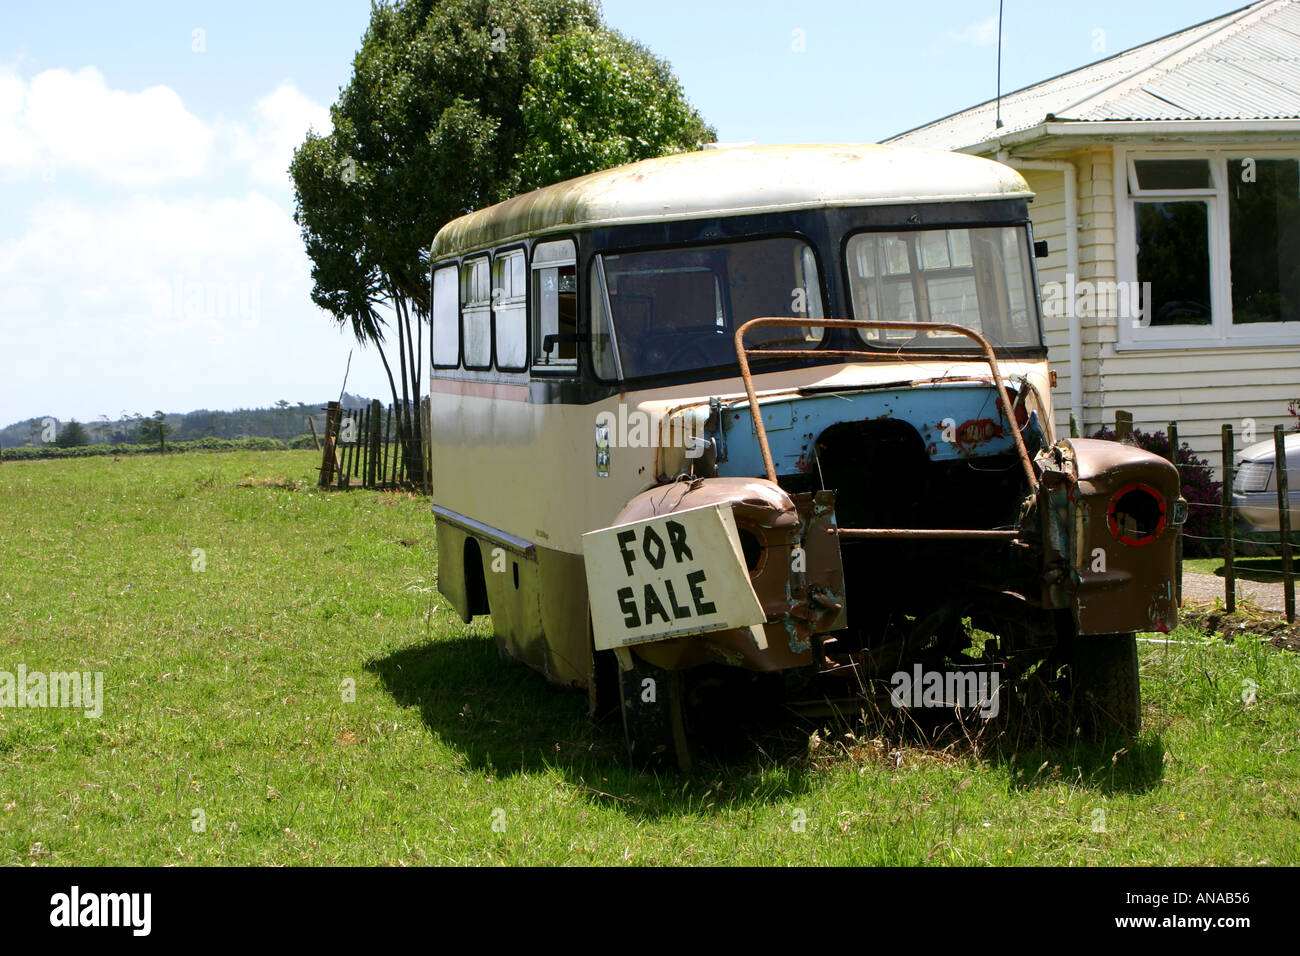 well worn outdated and rusty bus for sale North Island New Zealand Stock Photo